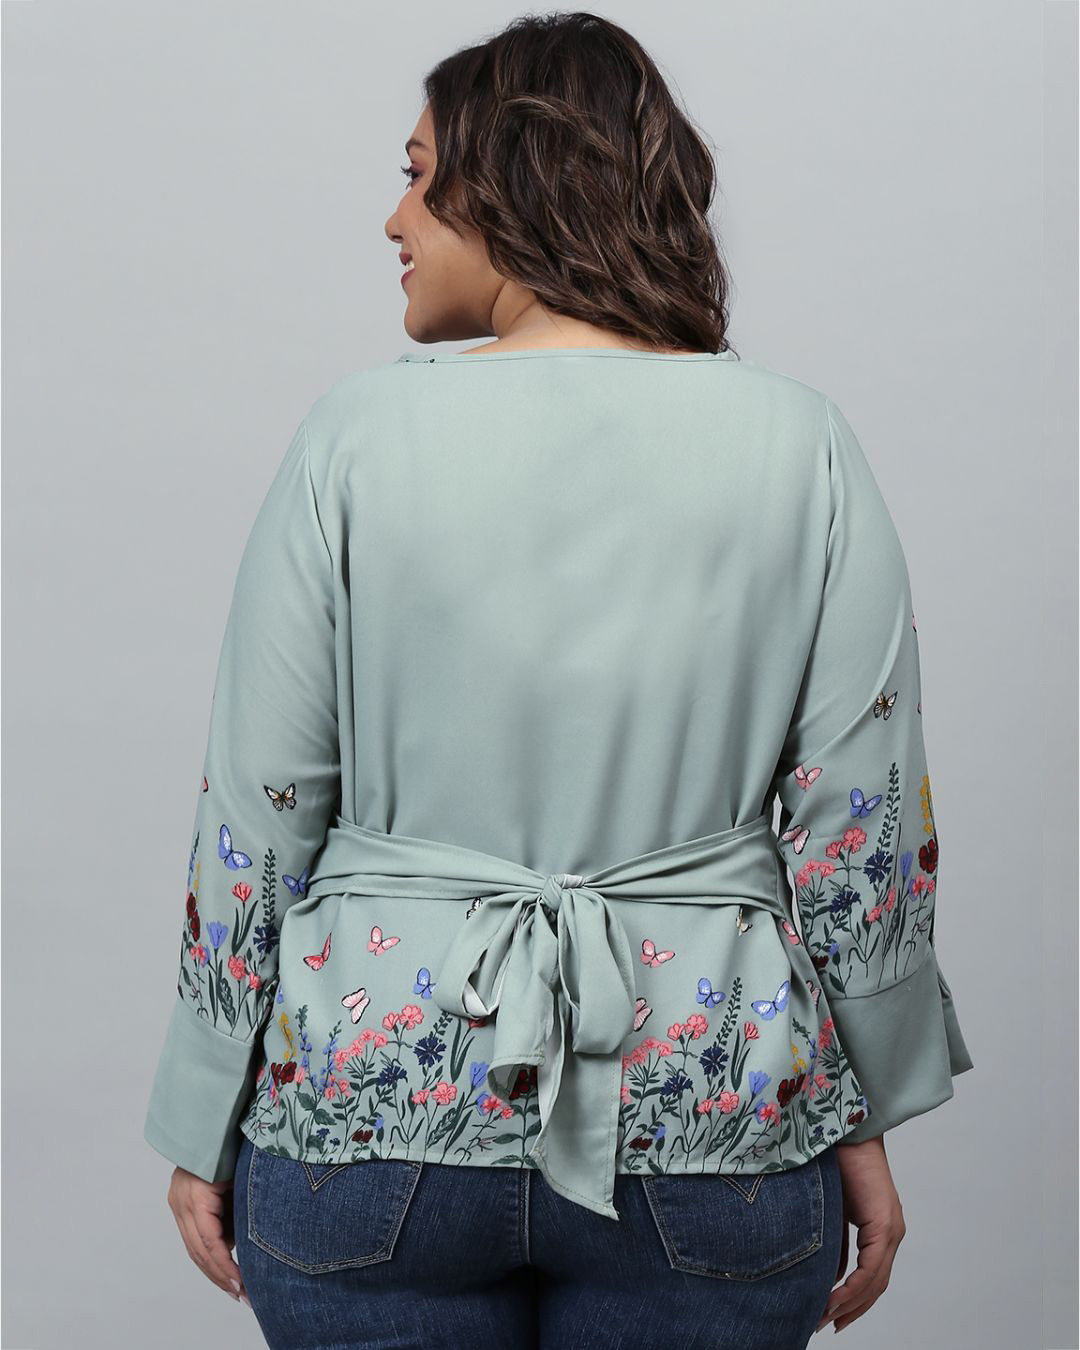 Shop Women's Grey Floral Stylish Casual Top-Back